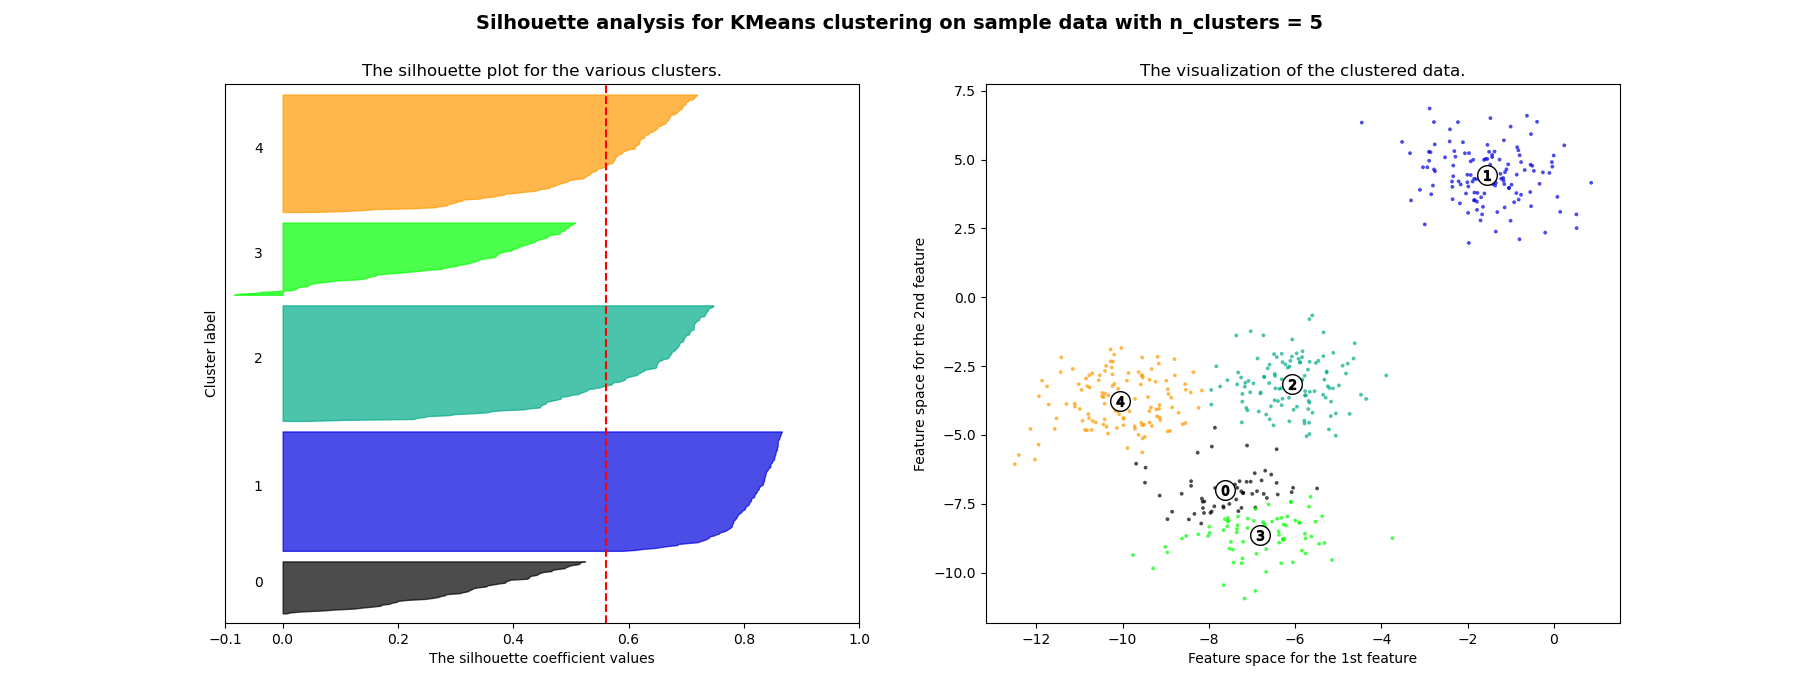 ../../_images/sphx_glr_plot_kmeans_silhouette_analysis_004.png